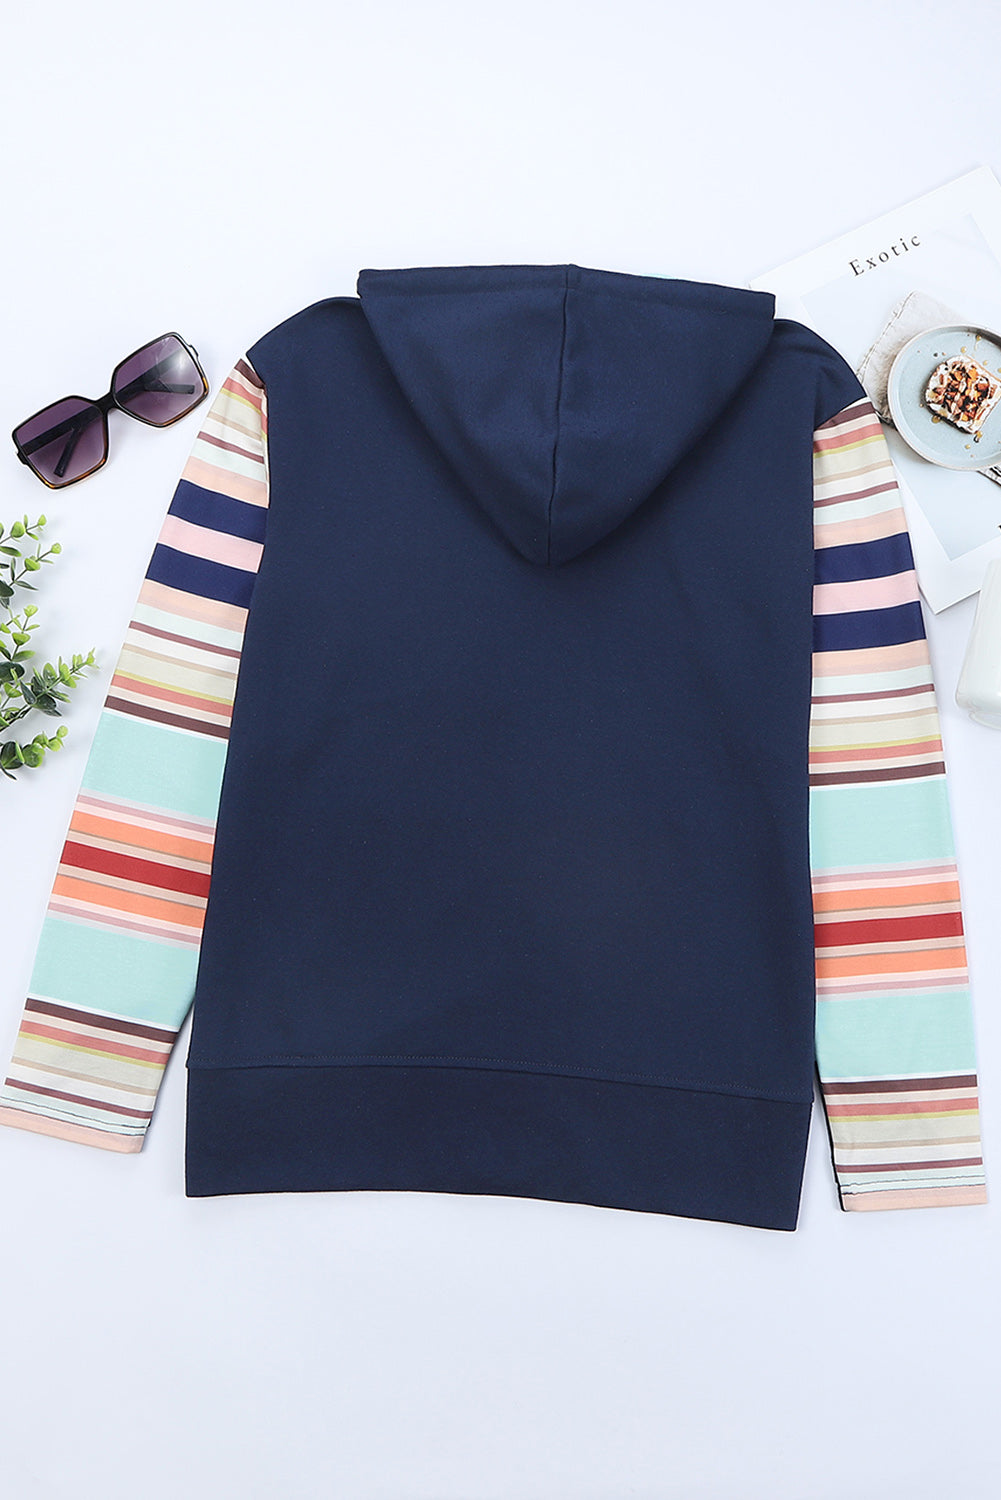 Double Take Striped Color Block Zip Up Jacket